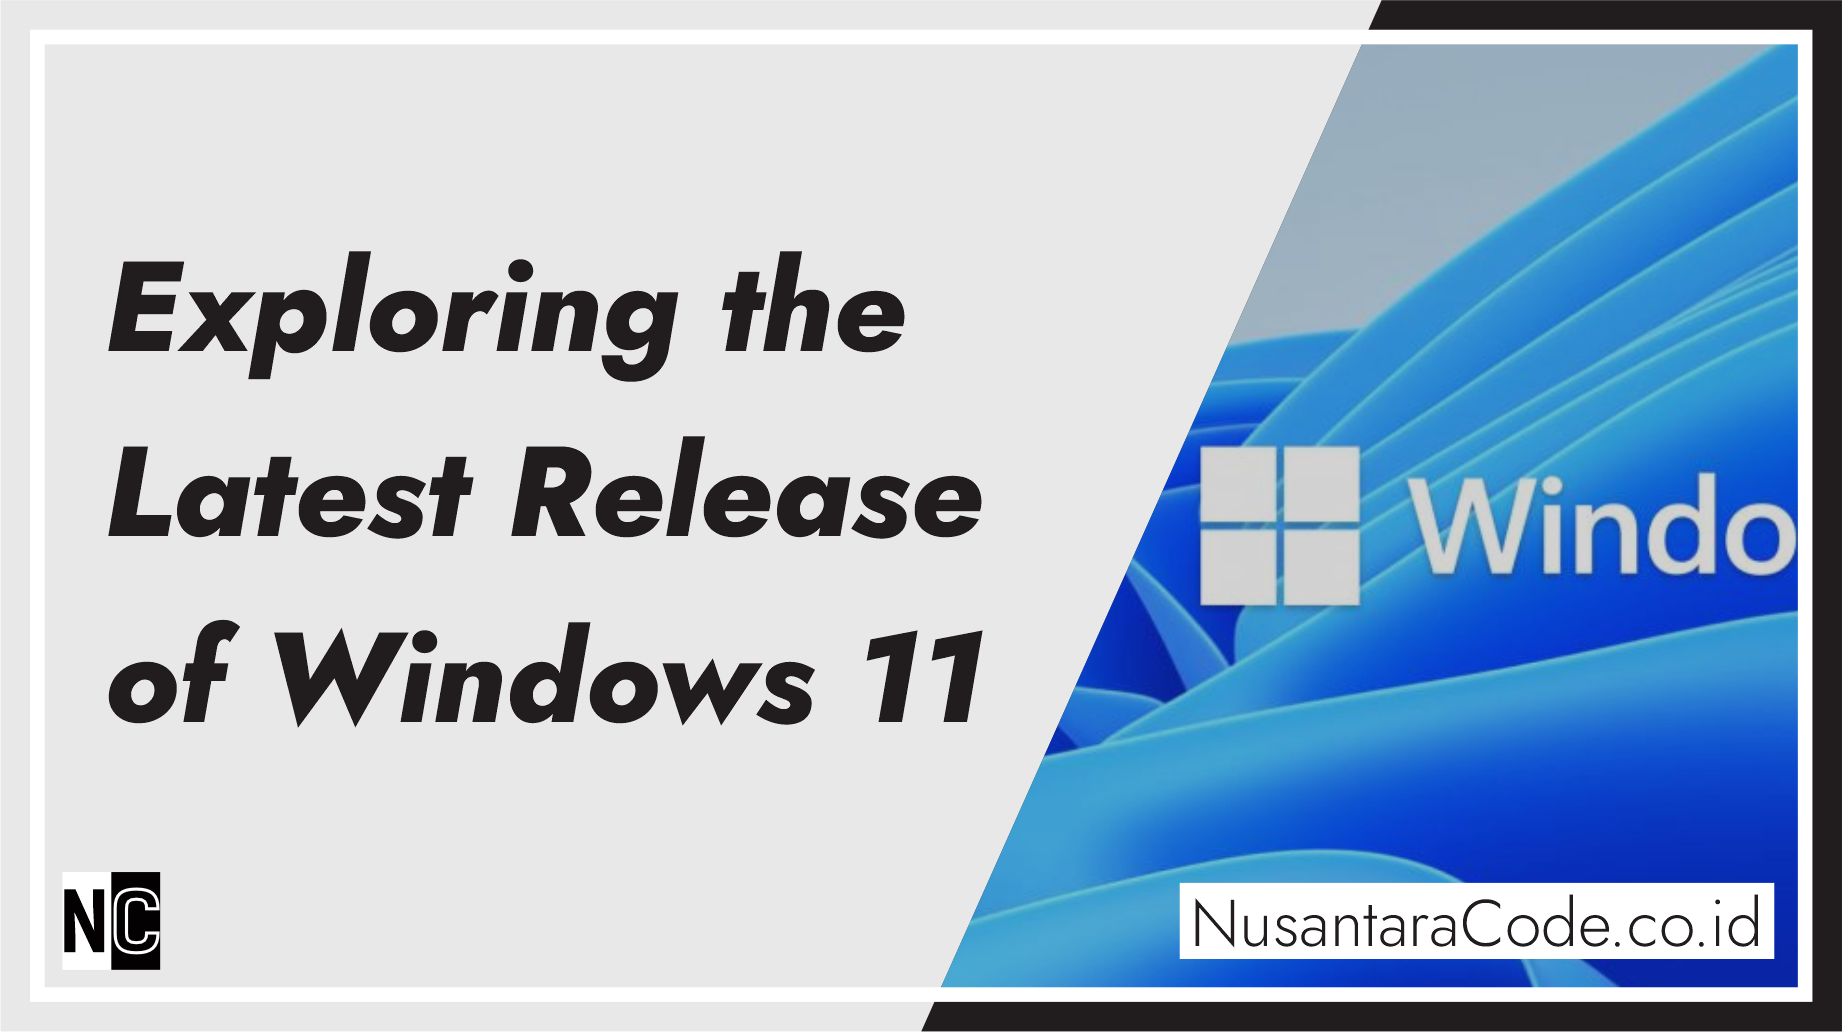 Exploring the Latest Release of Windows 11